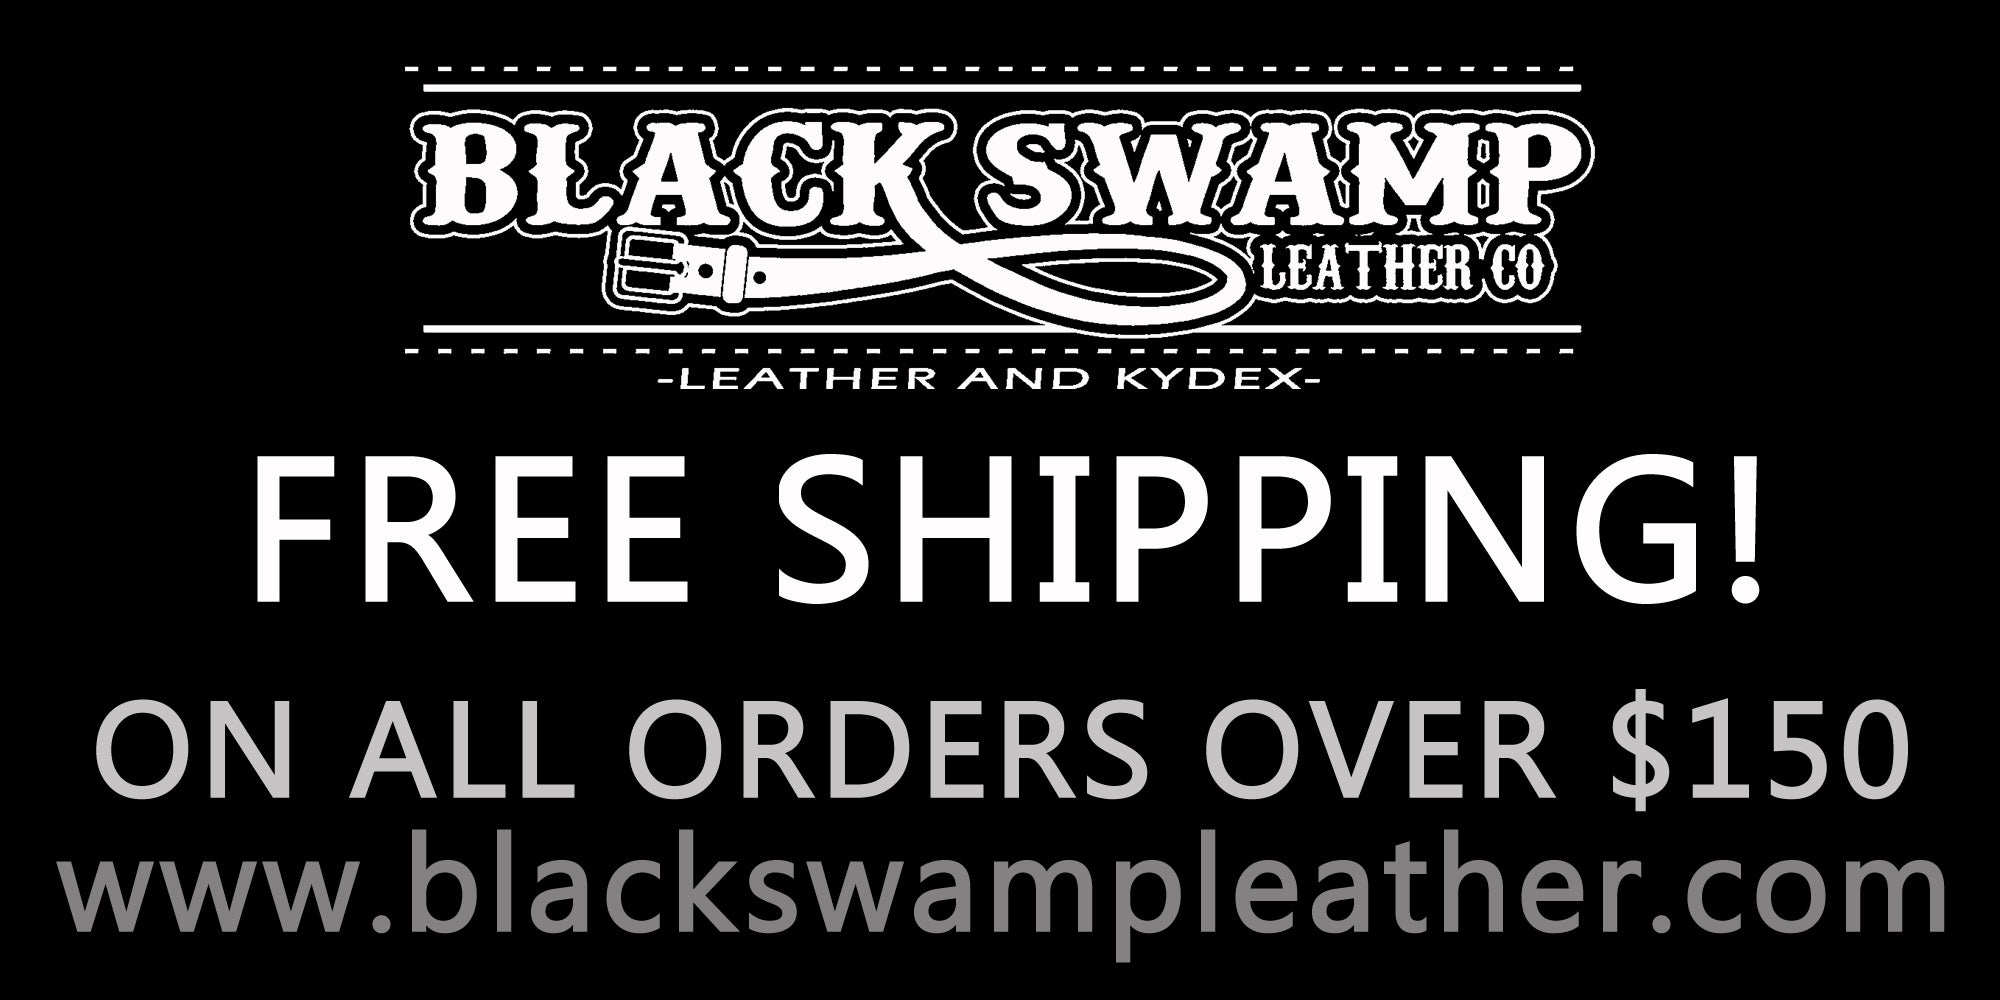 NOW FREE SHIPPING ON ORDERS OVER $150